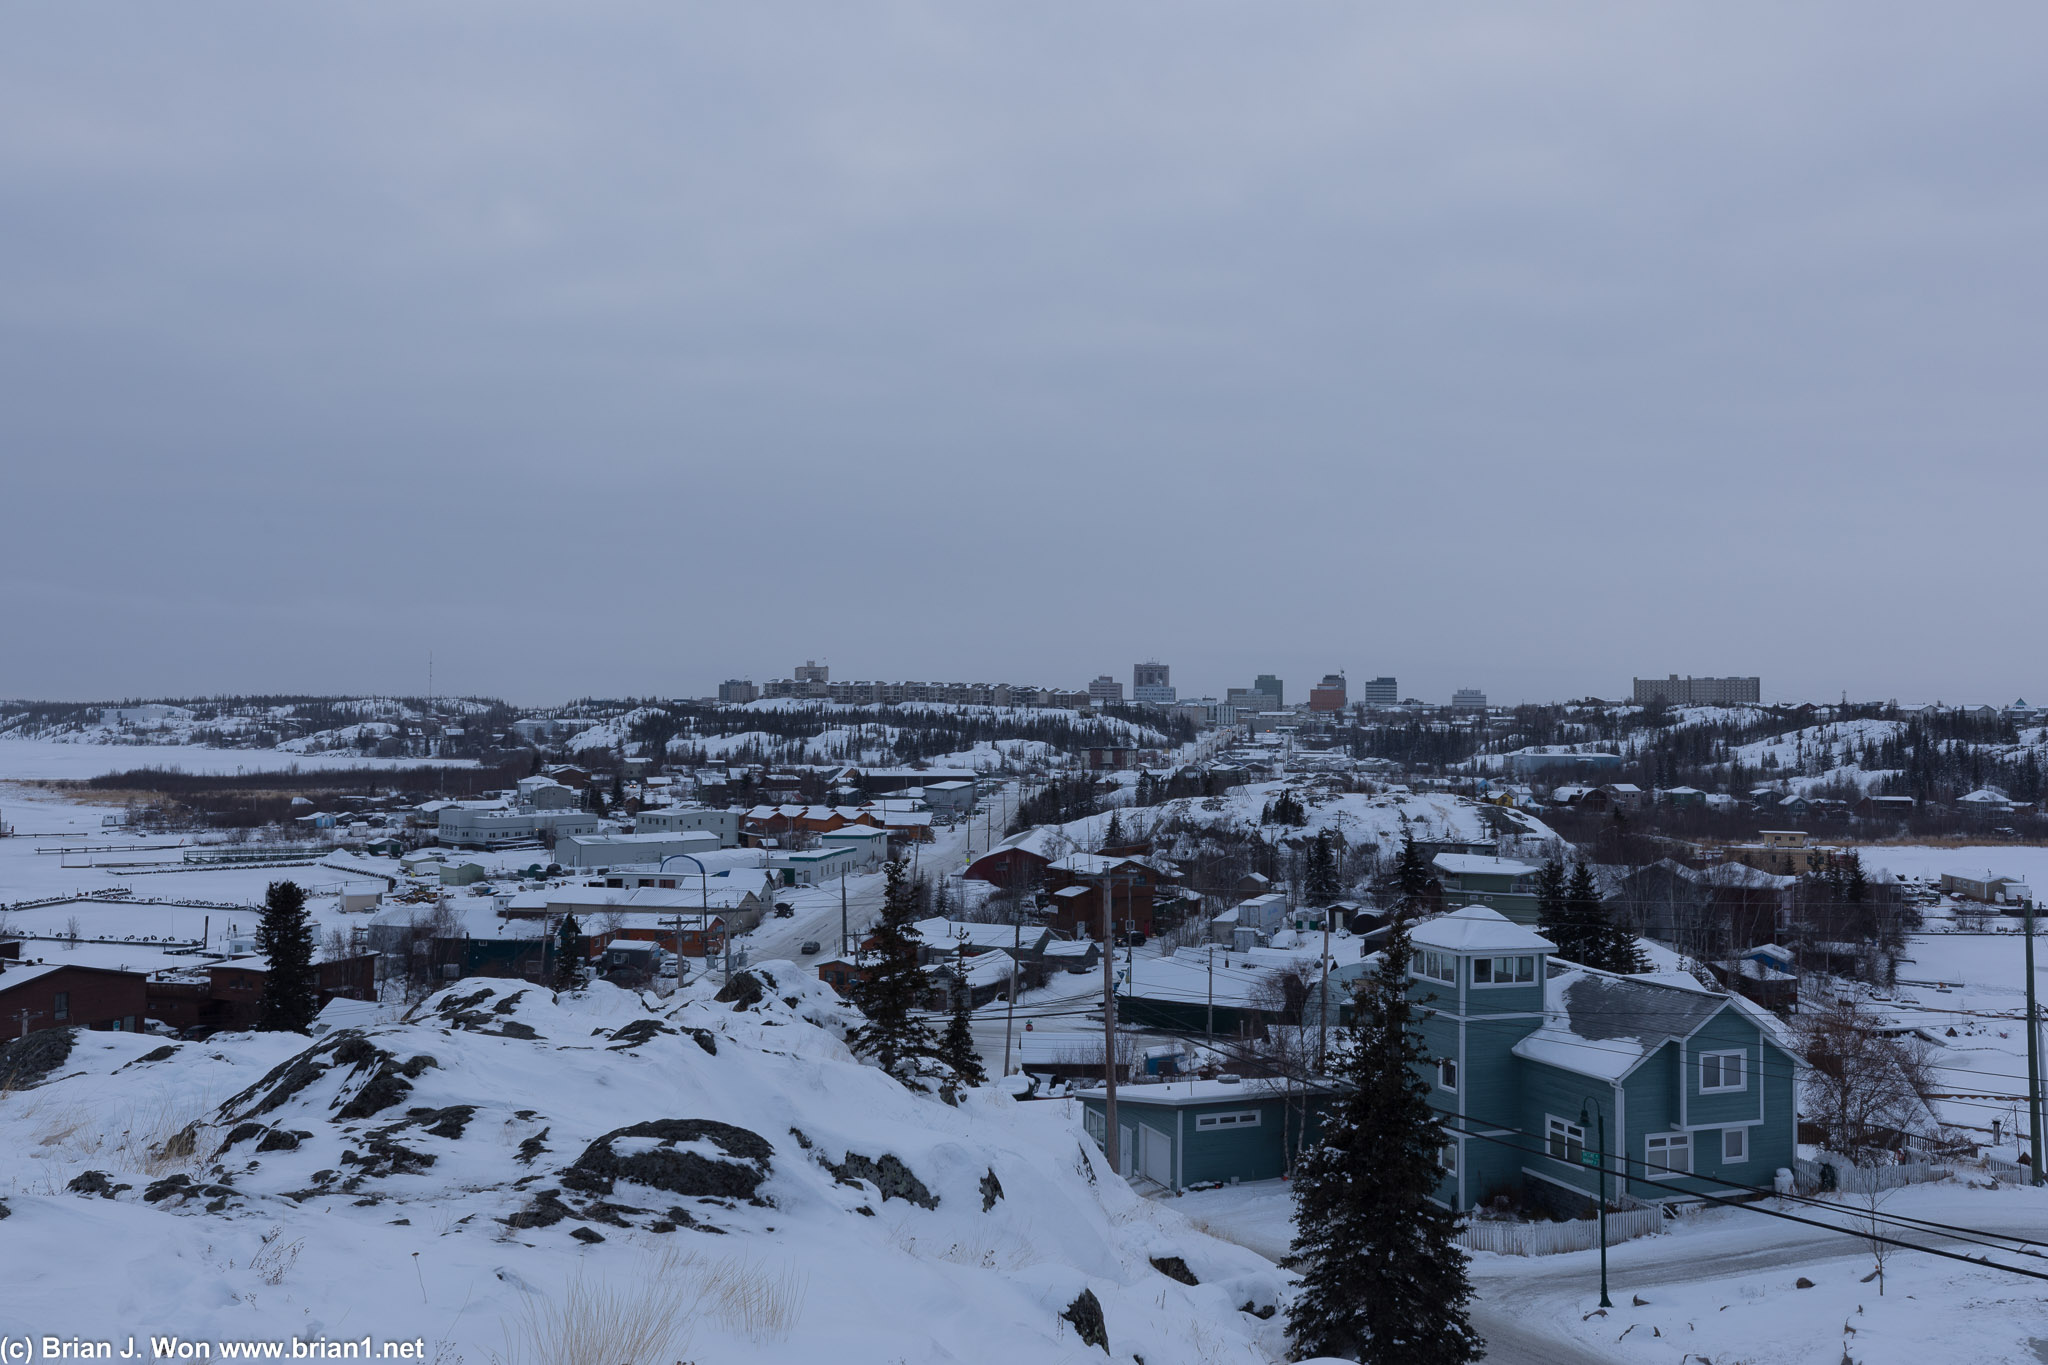 The city of Yellowknife, as viewed from the Bush Pilots Monument.